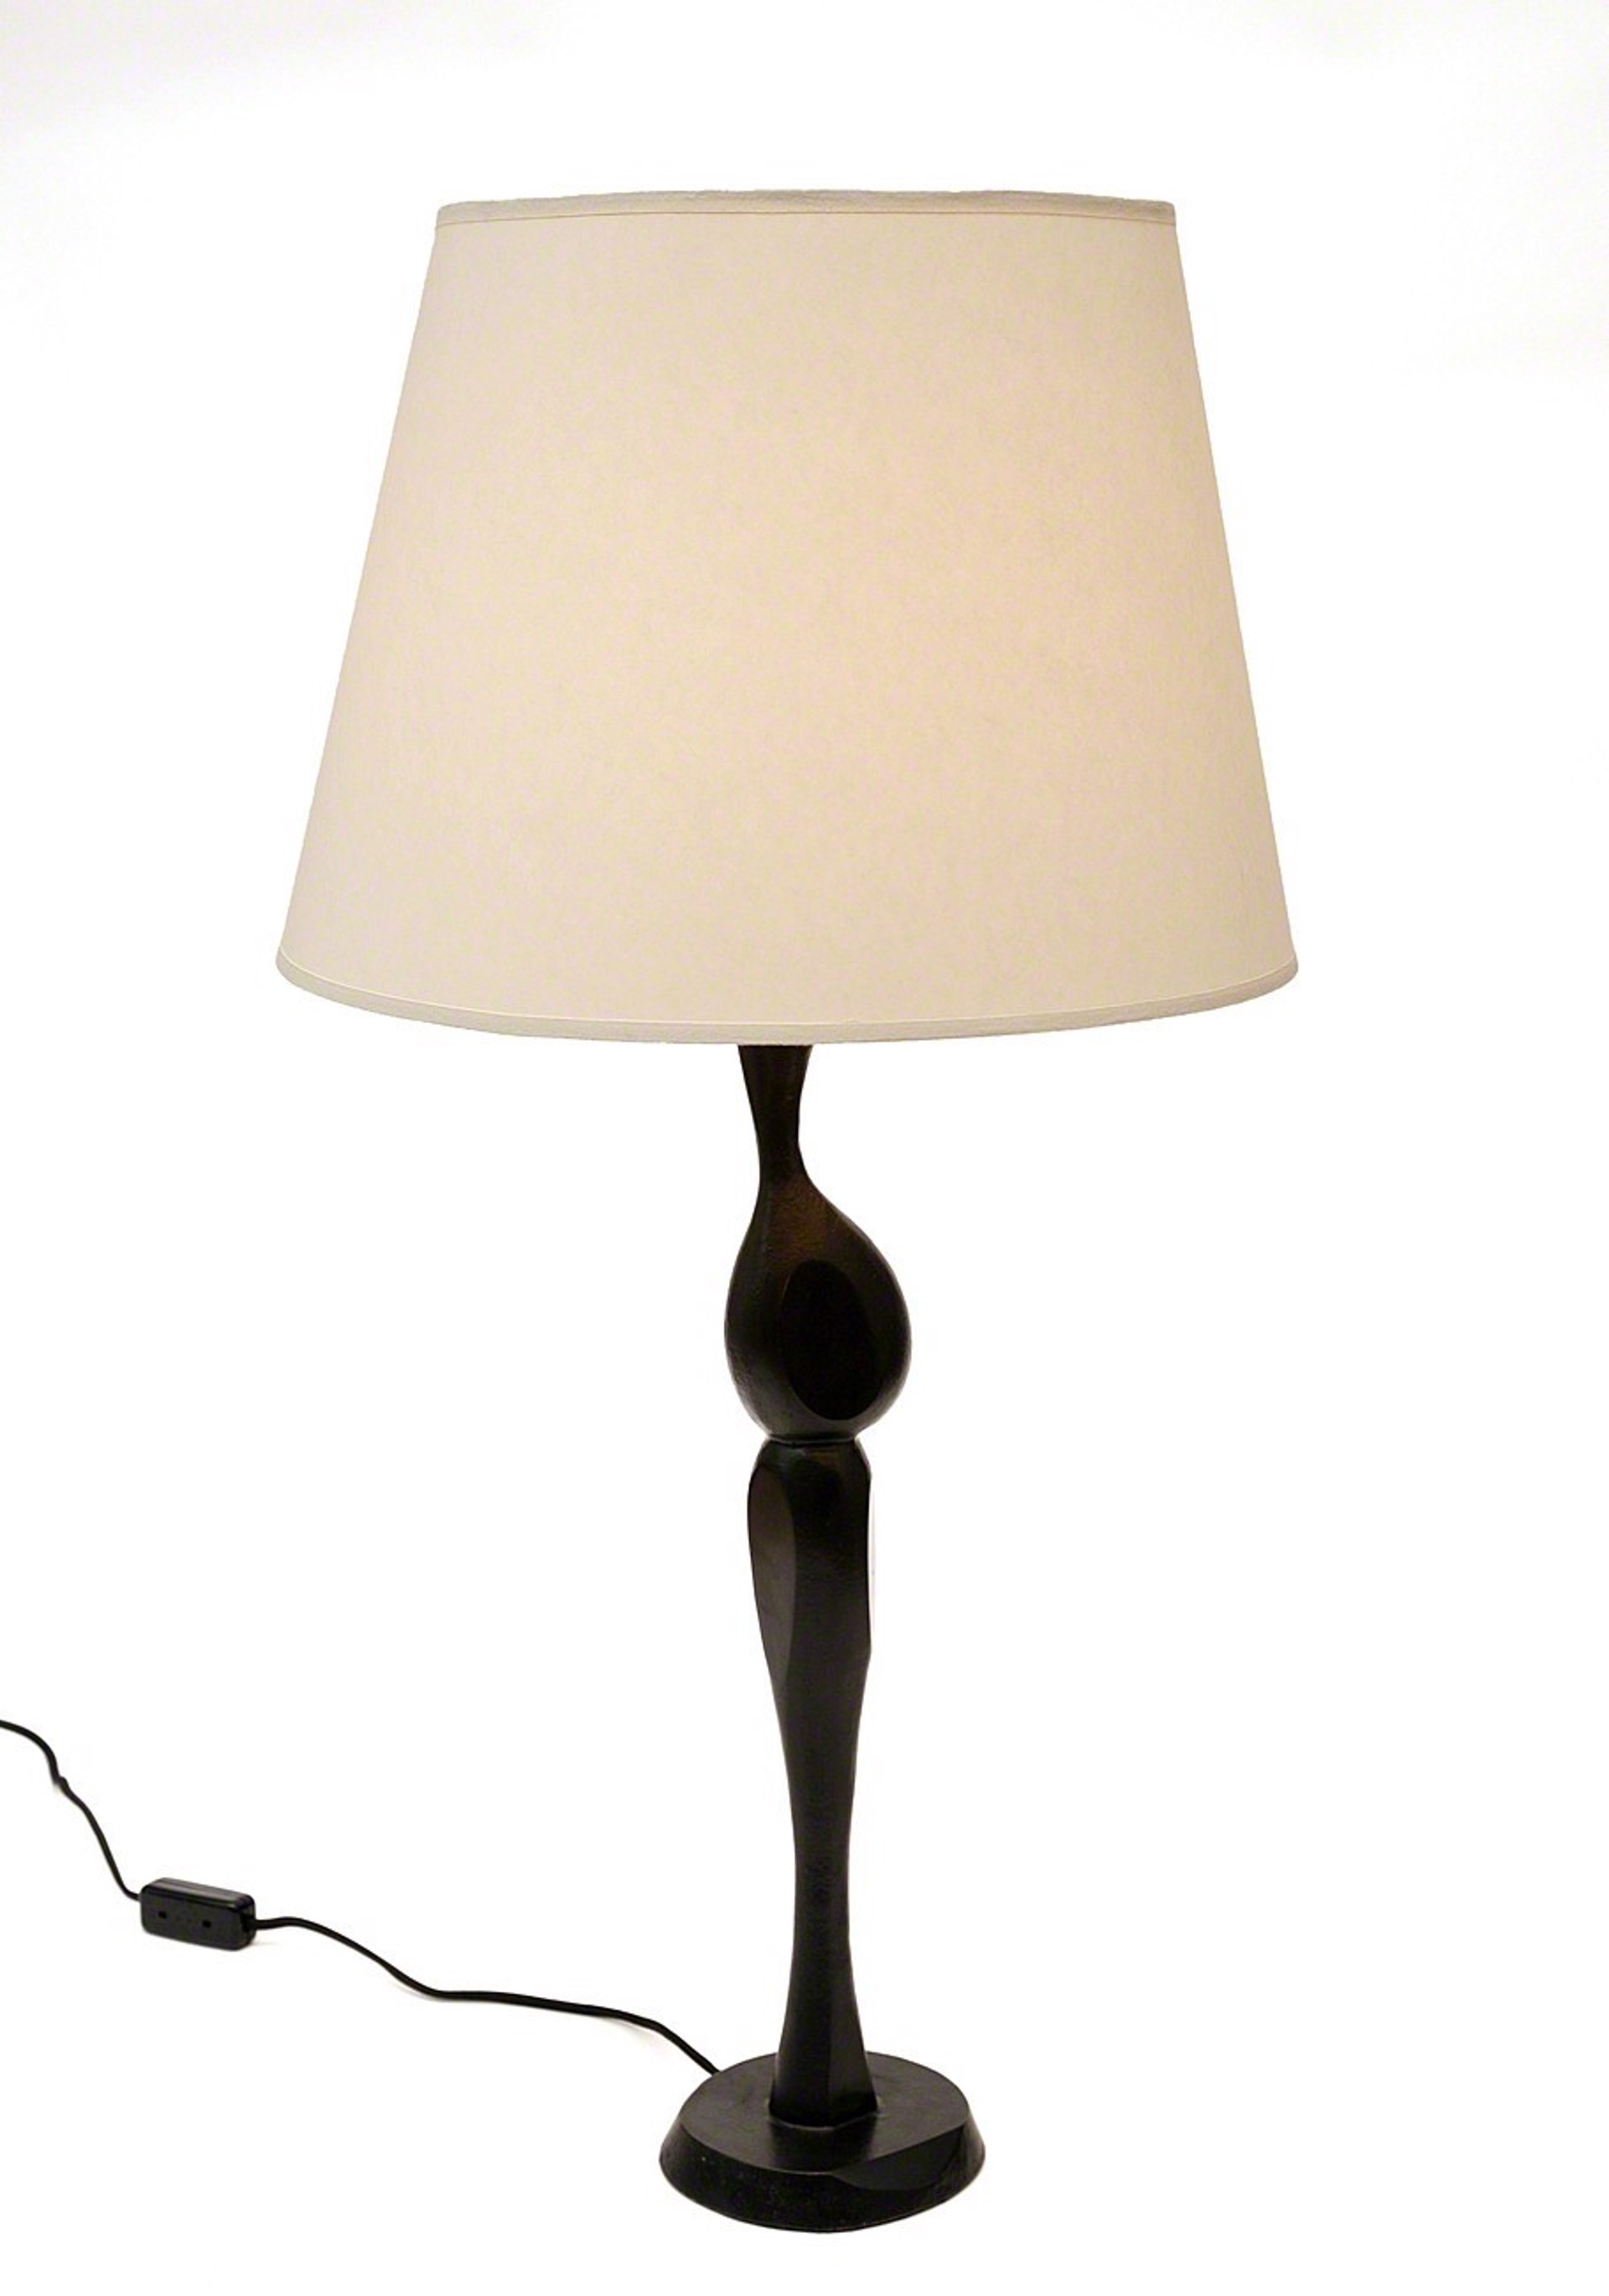 "Lola" Lamp by Jacques Jarrige